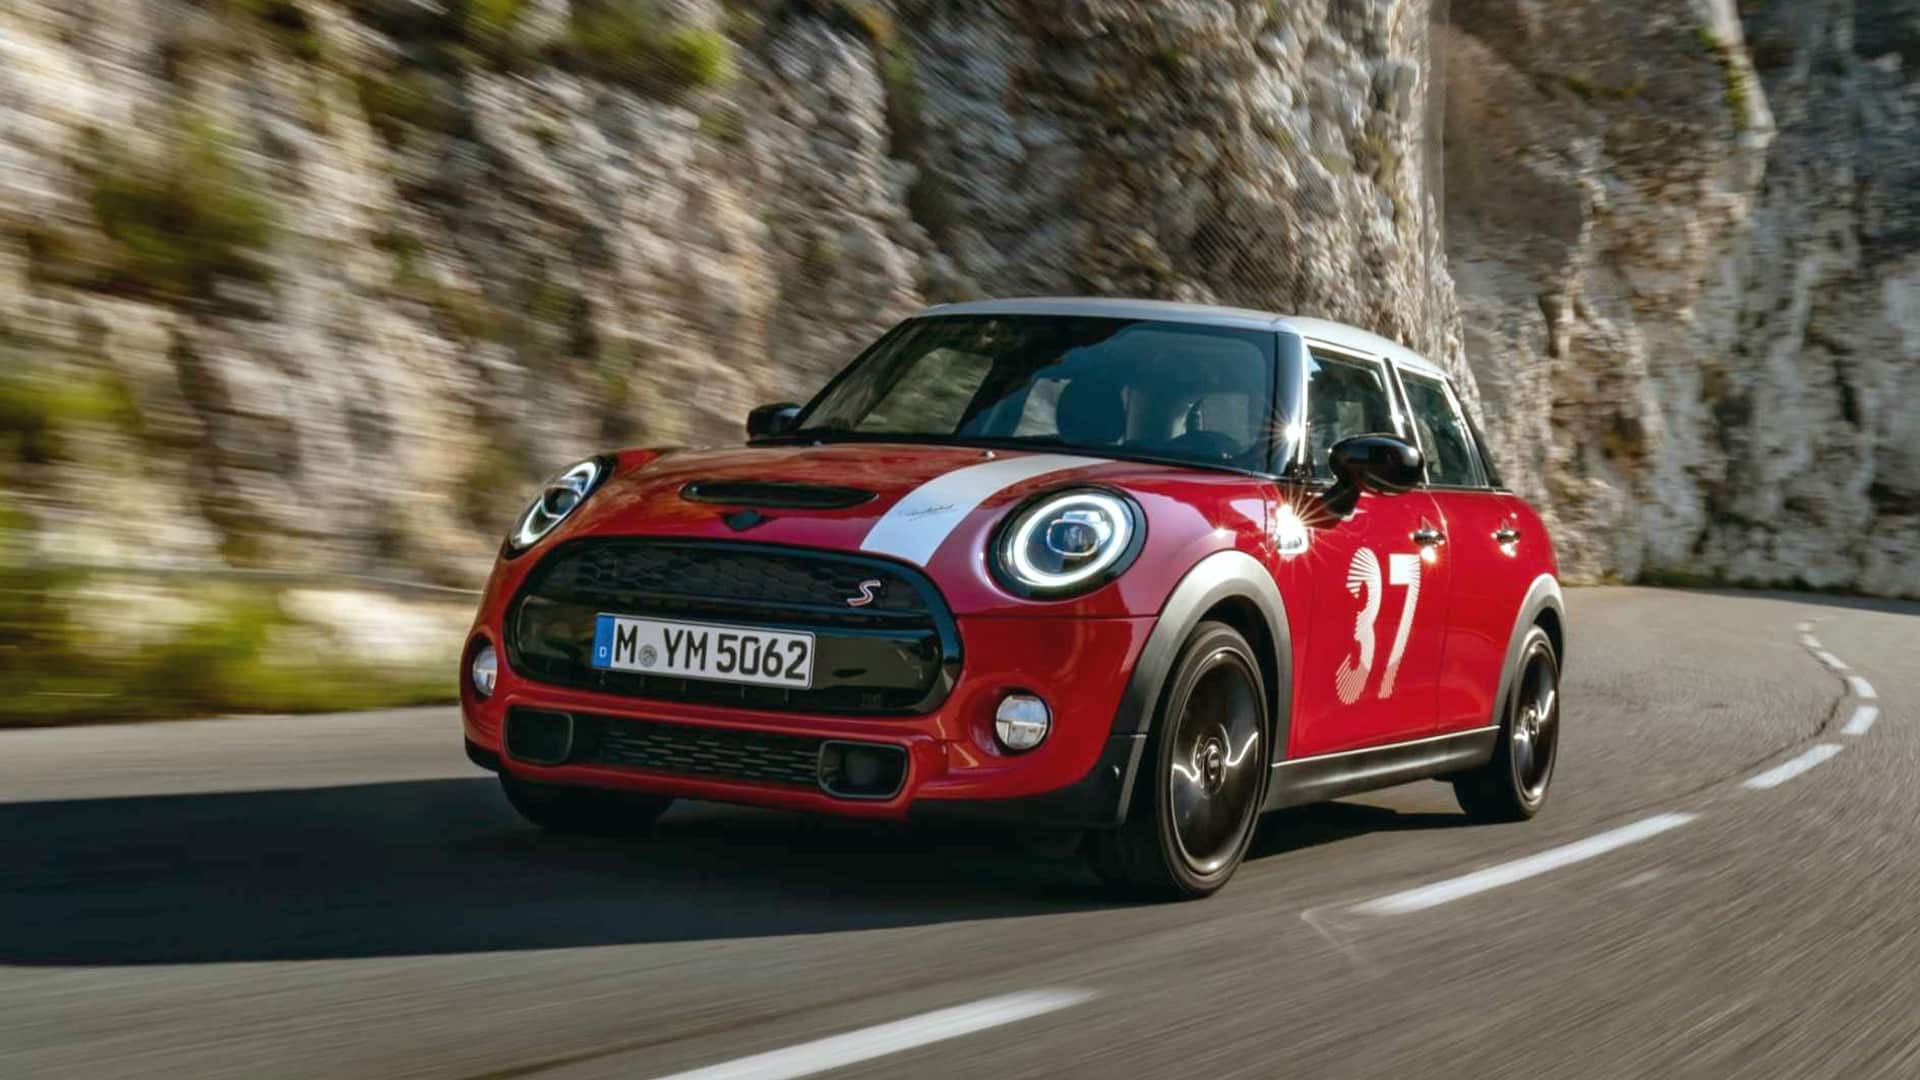 BMW launches MINI Paddy Hopkirk Edition in India priced at Rs 41.7 lakh